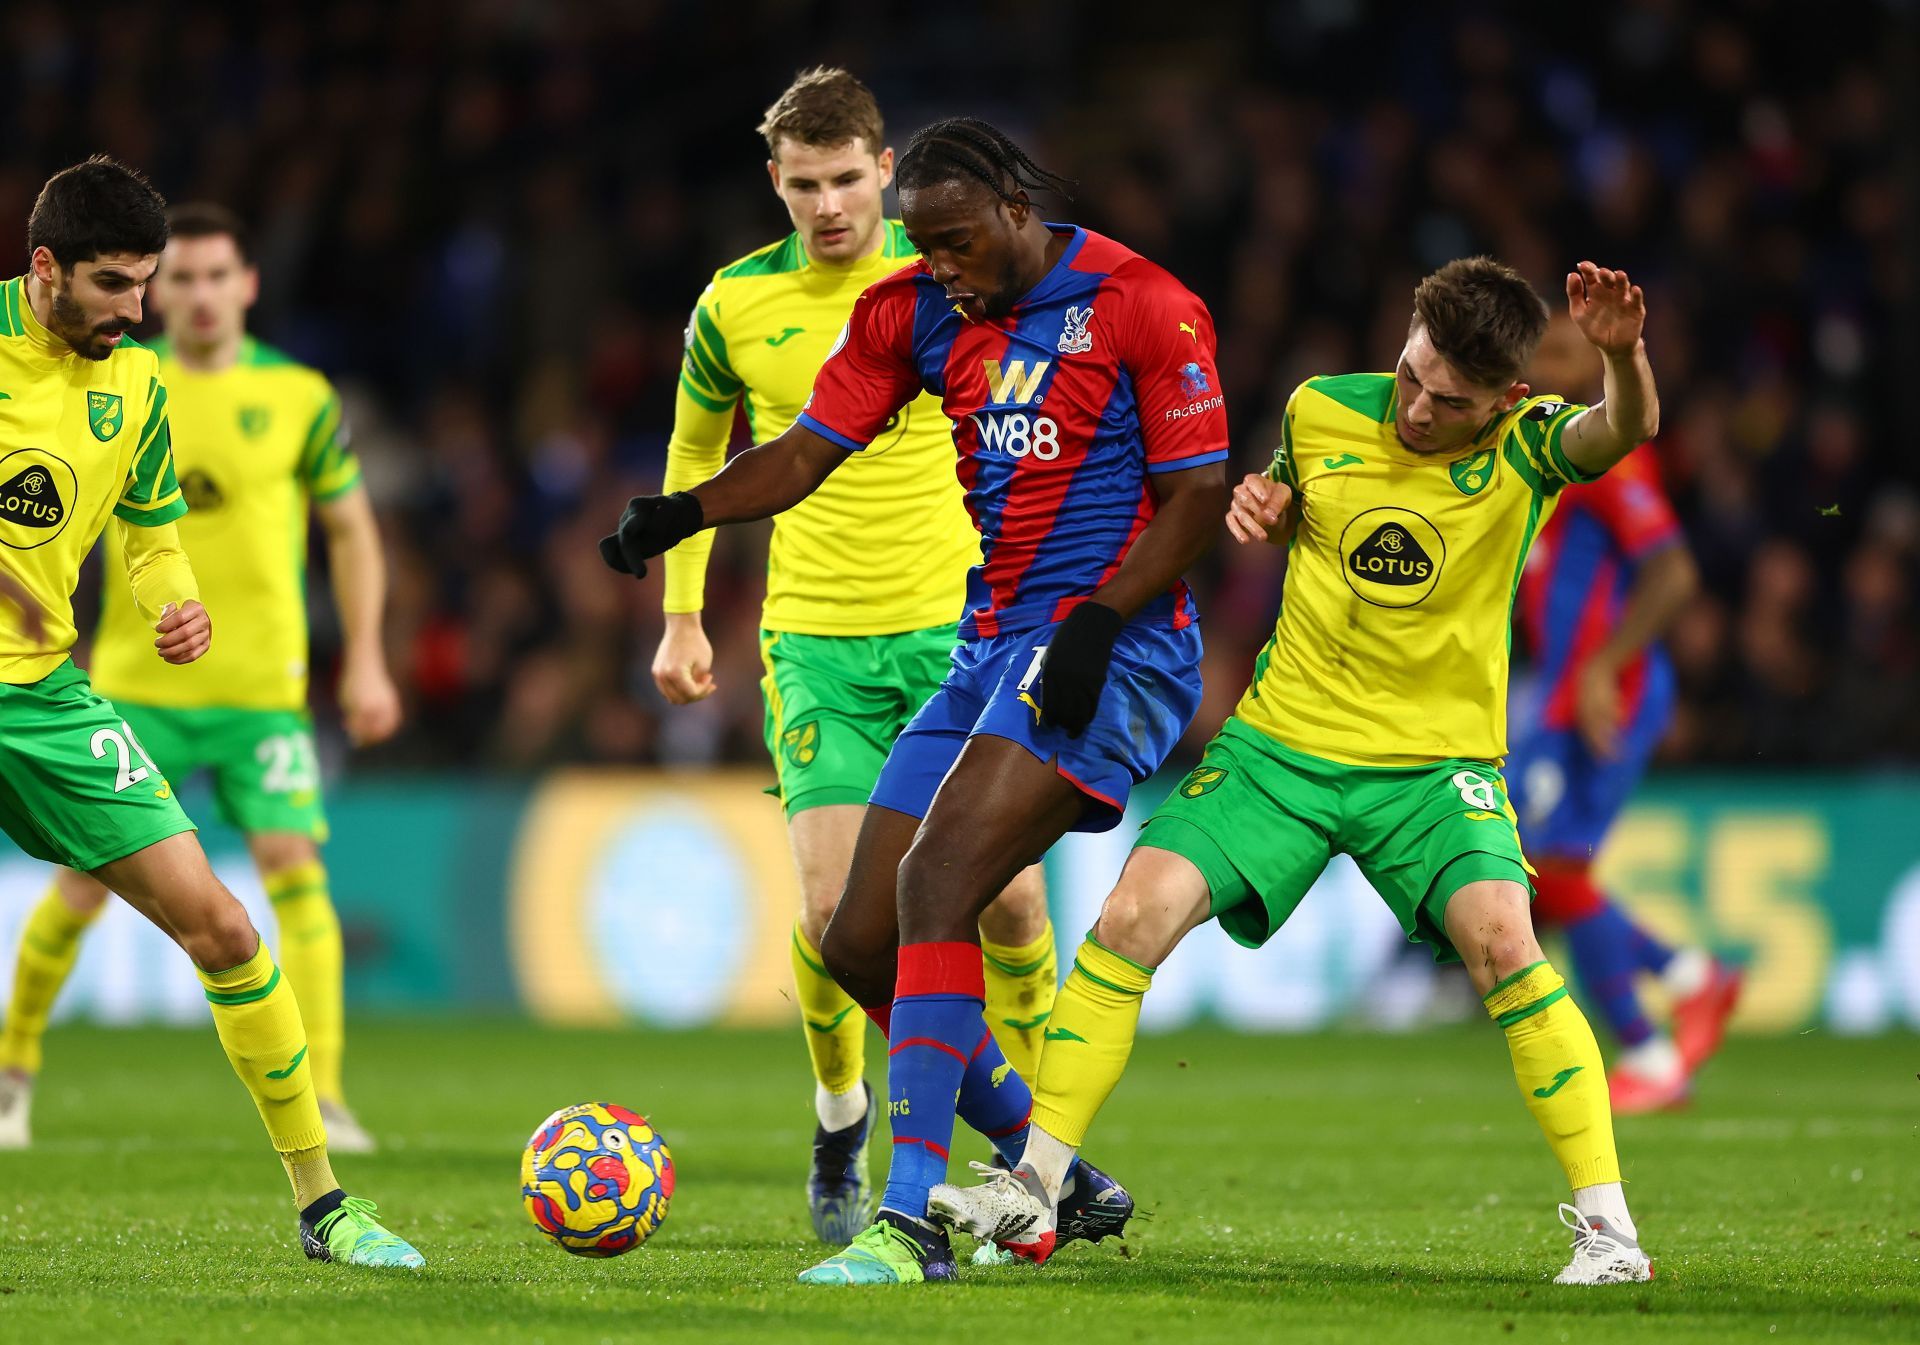 Norwich City play host to Crystal Palace on Wednesday